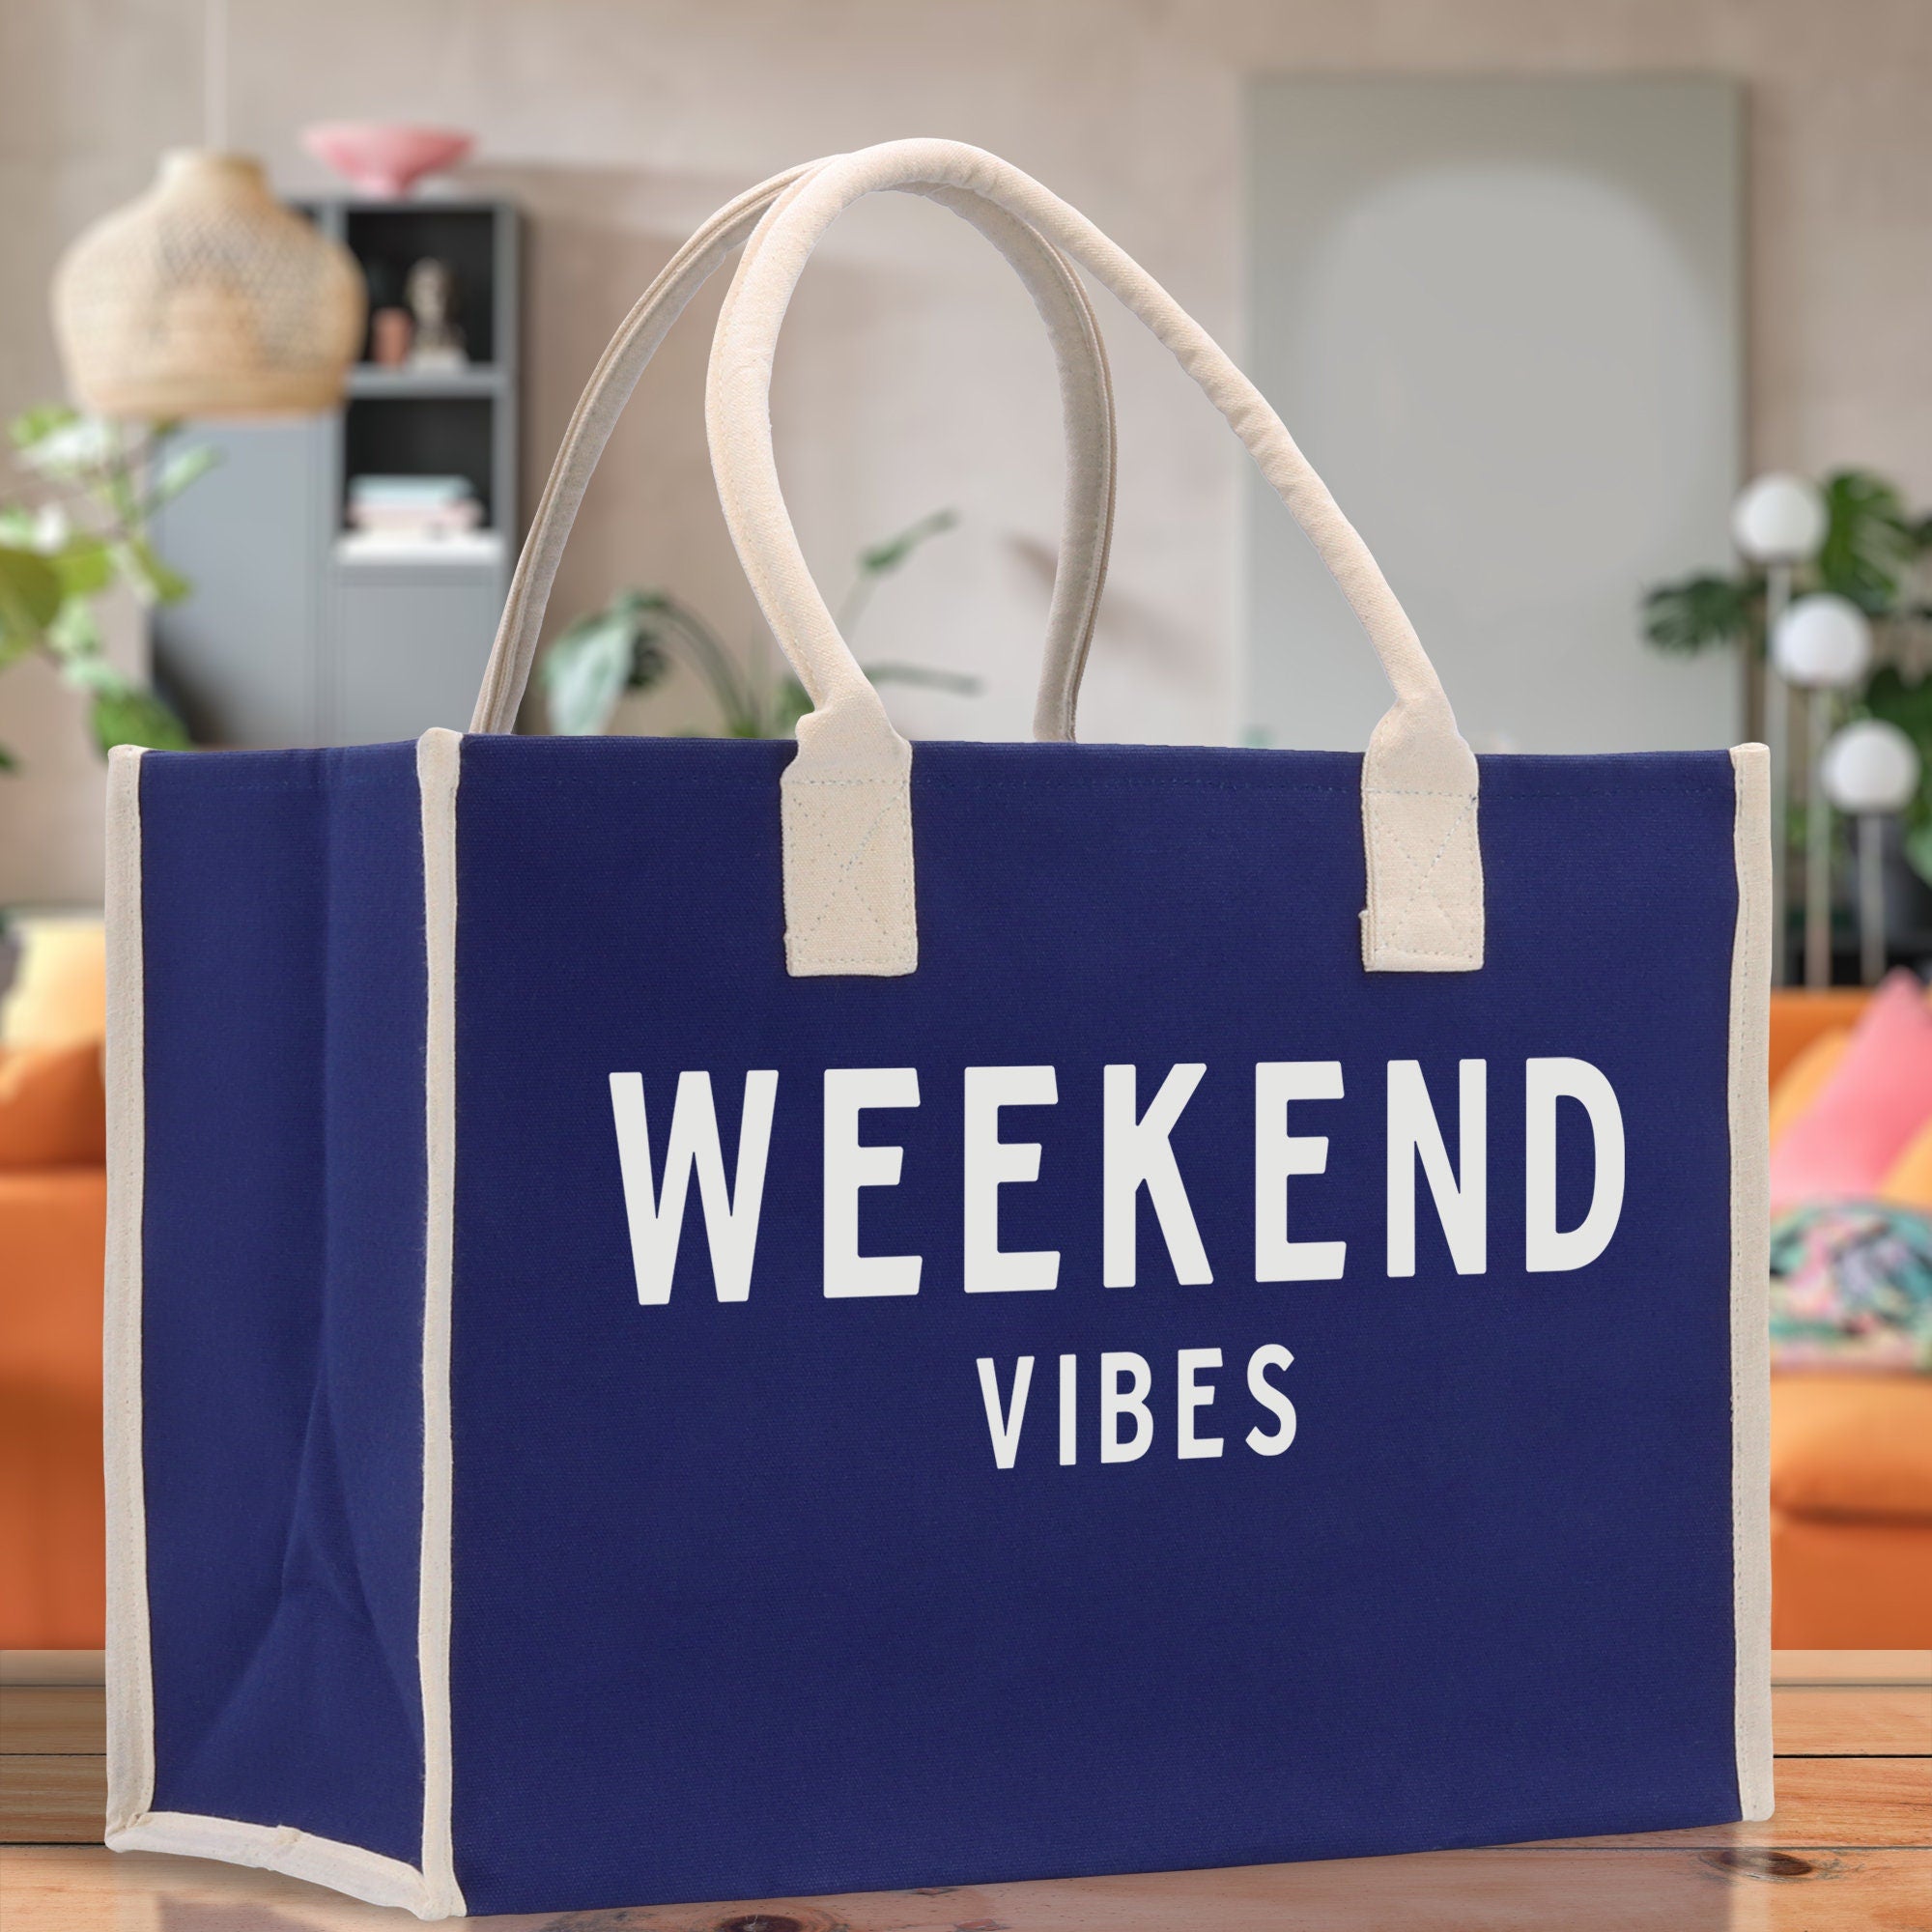 Weekend Vibes Cotton Canvas Chic Beach Tote Bag Multipurpose Tote Weekender Tote Gift for Her Outdoor Tote Vacation Tote Large Beach Bag